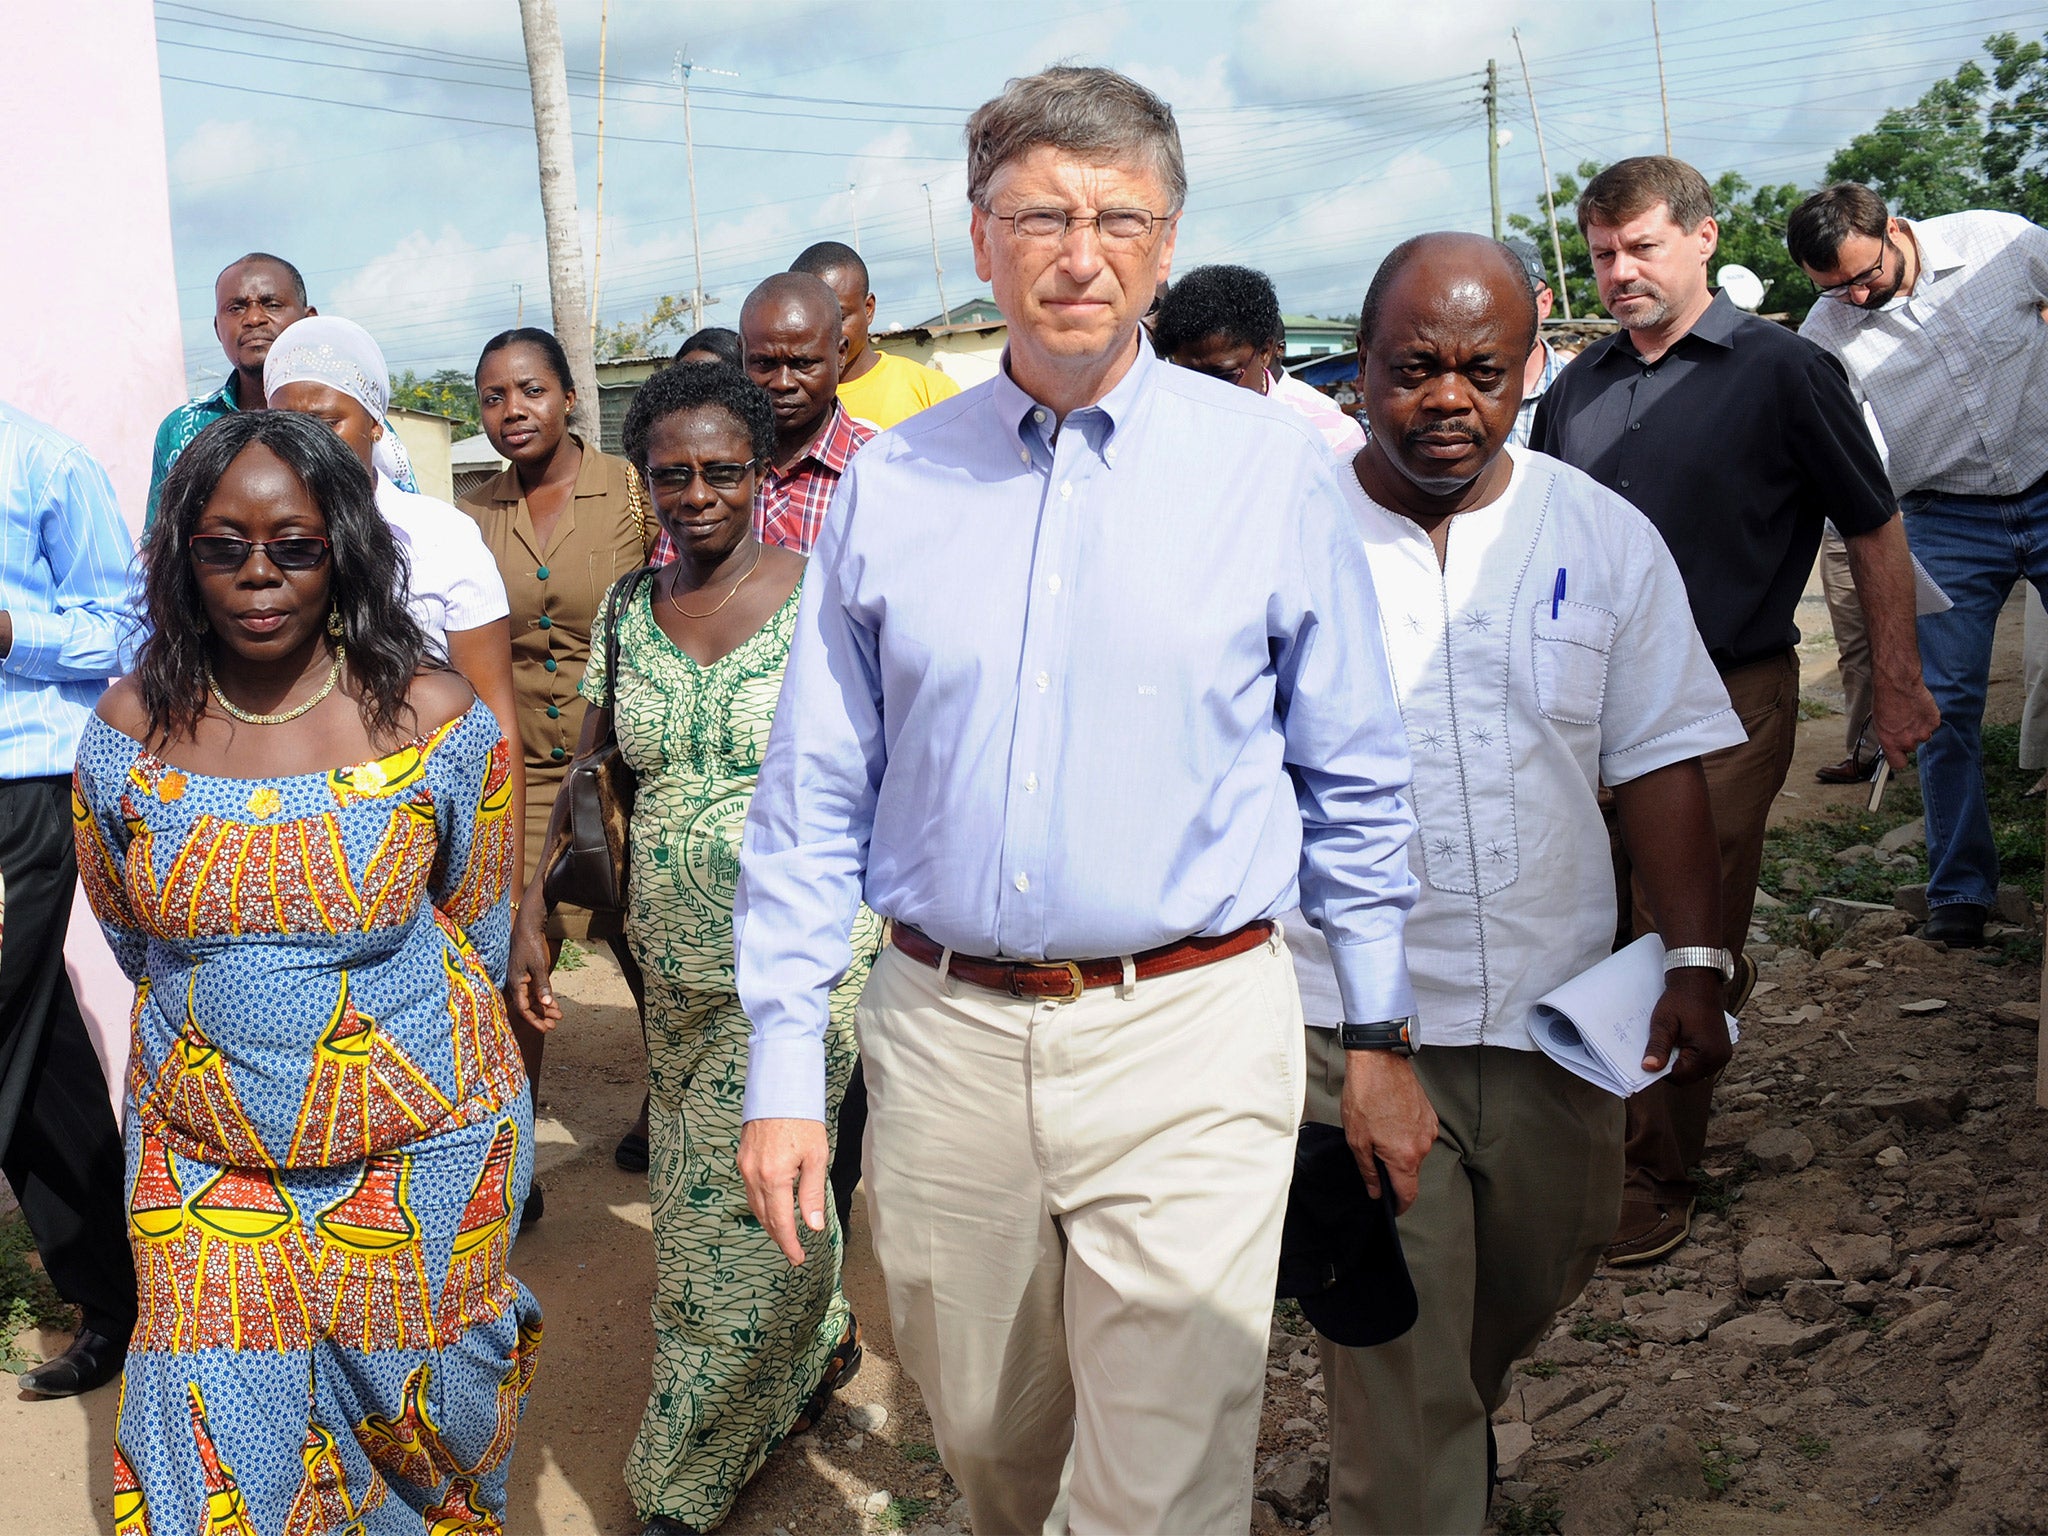 Gates Foundation accused of 'dangerously skewing' aid priorities by  promoting 'corporate globalisation' | The Independent | The Independent